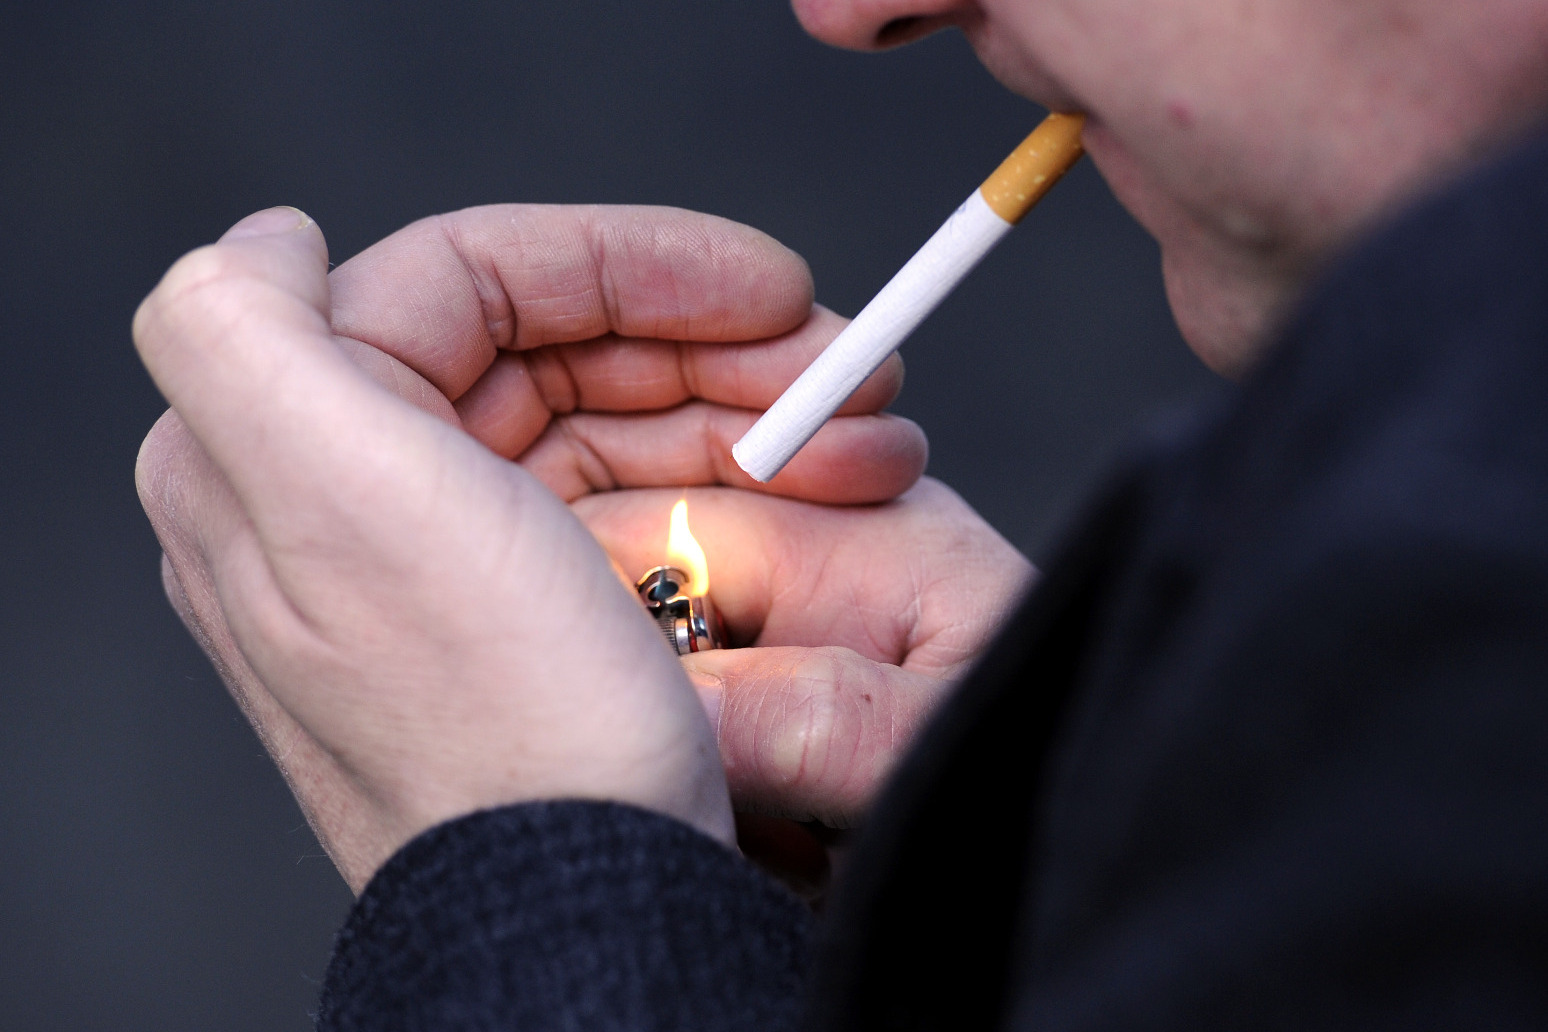 Only 45 per cent of smokers in hospital get advice on quitting 